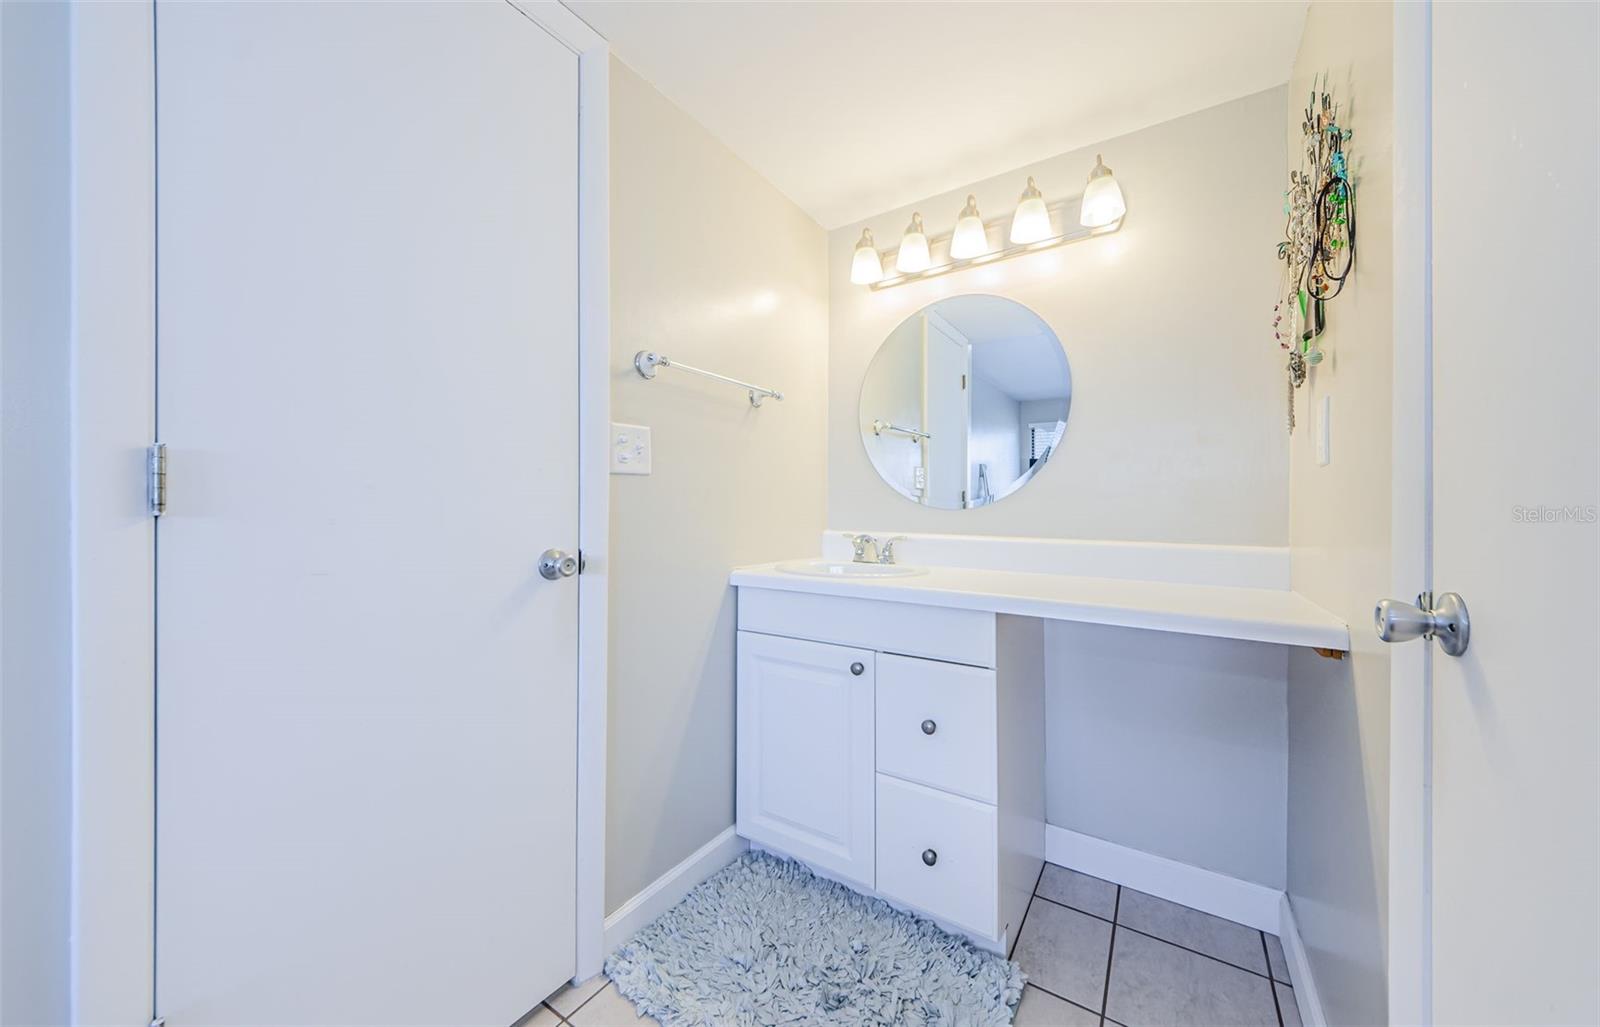 Vanity area, walk in closet on the right, entrance to tub/shower combination